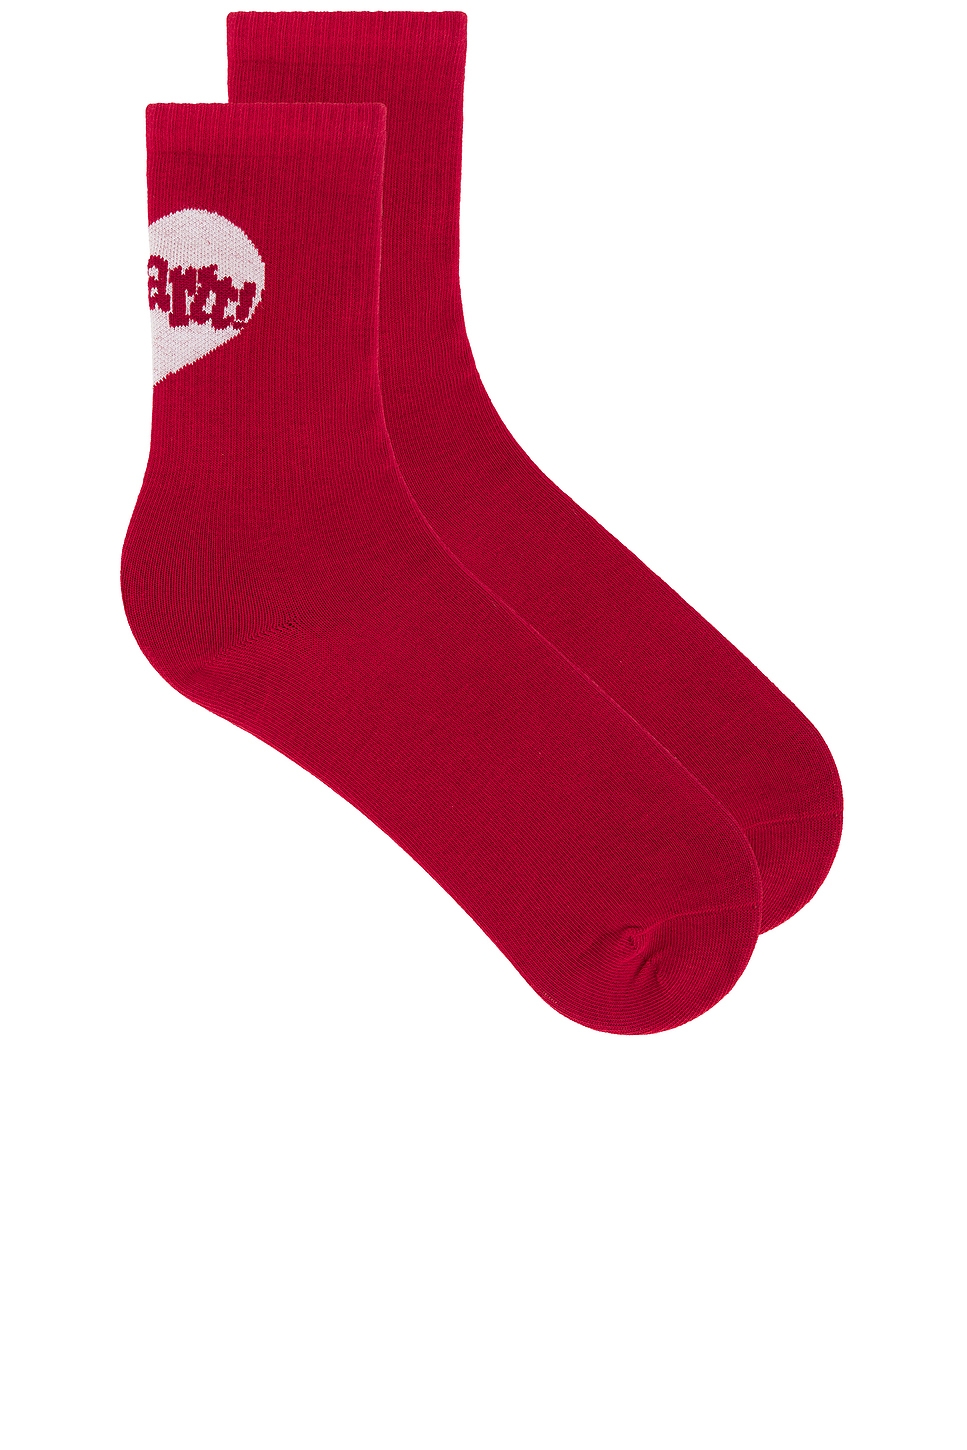 Amour Socks in Red